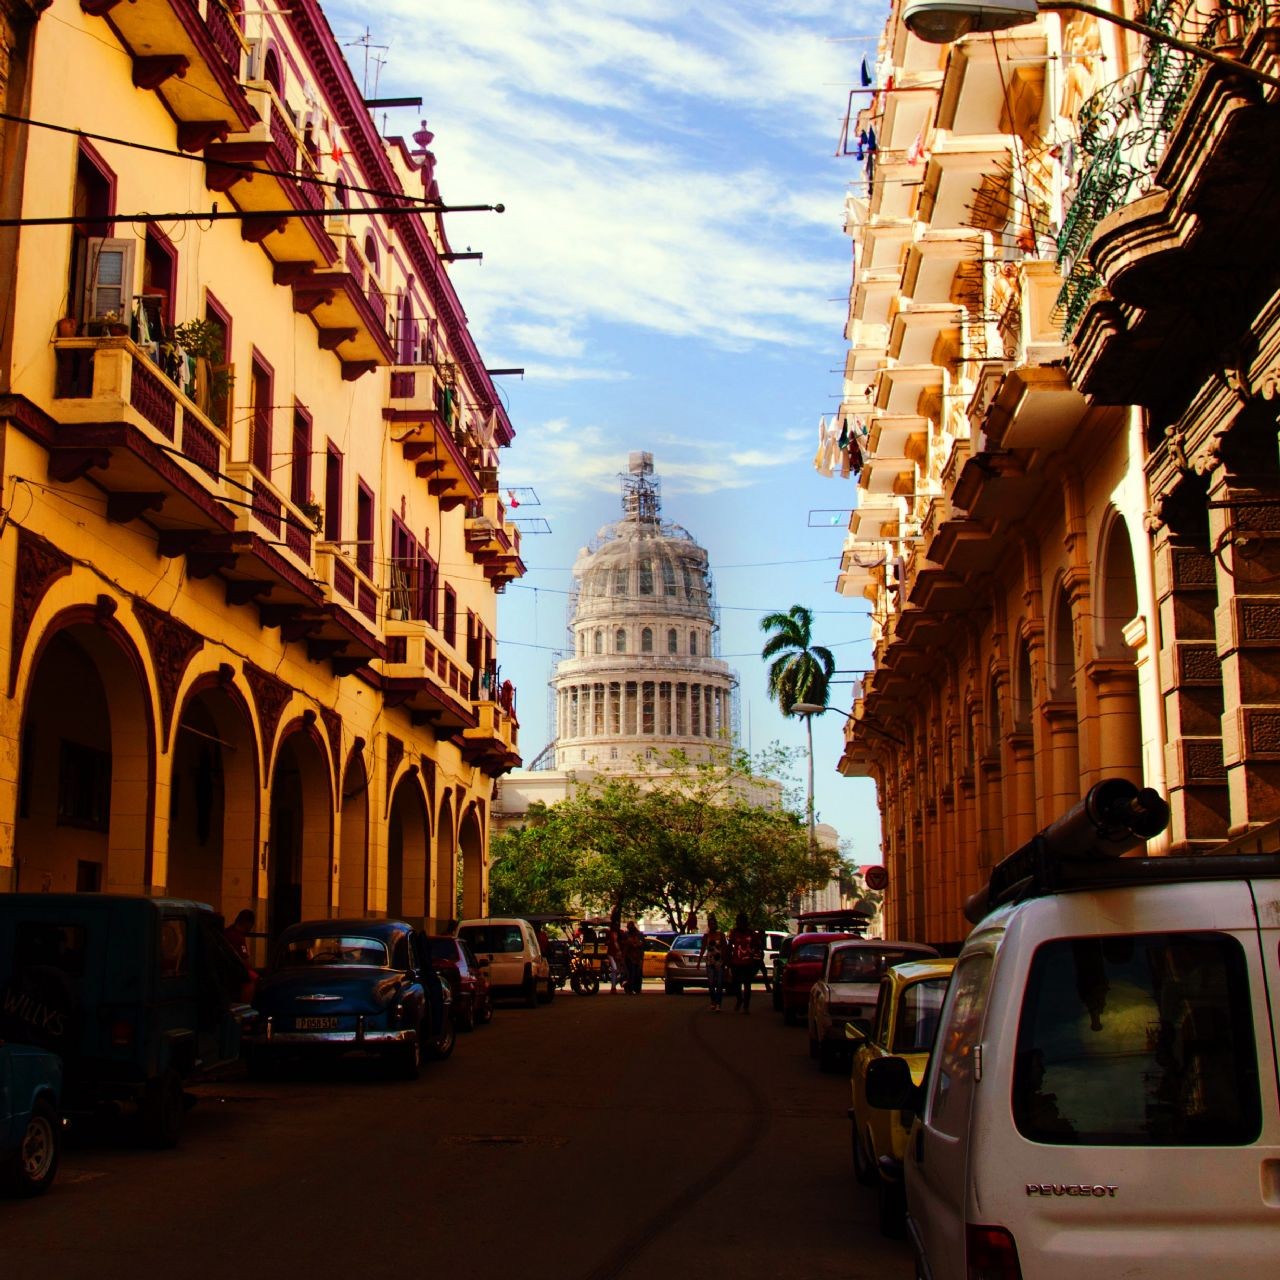 Here are some additional tips and advice for traveling to Cuba